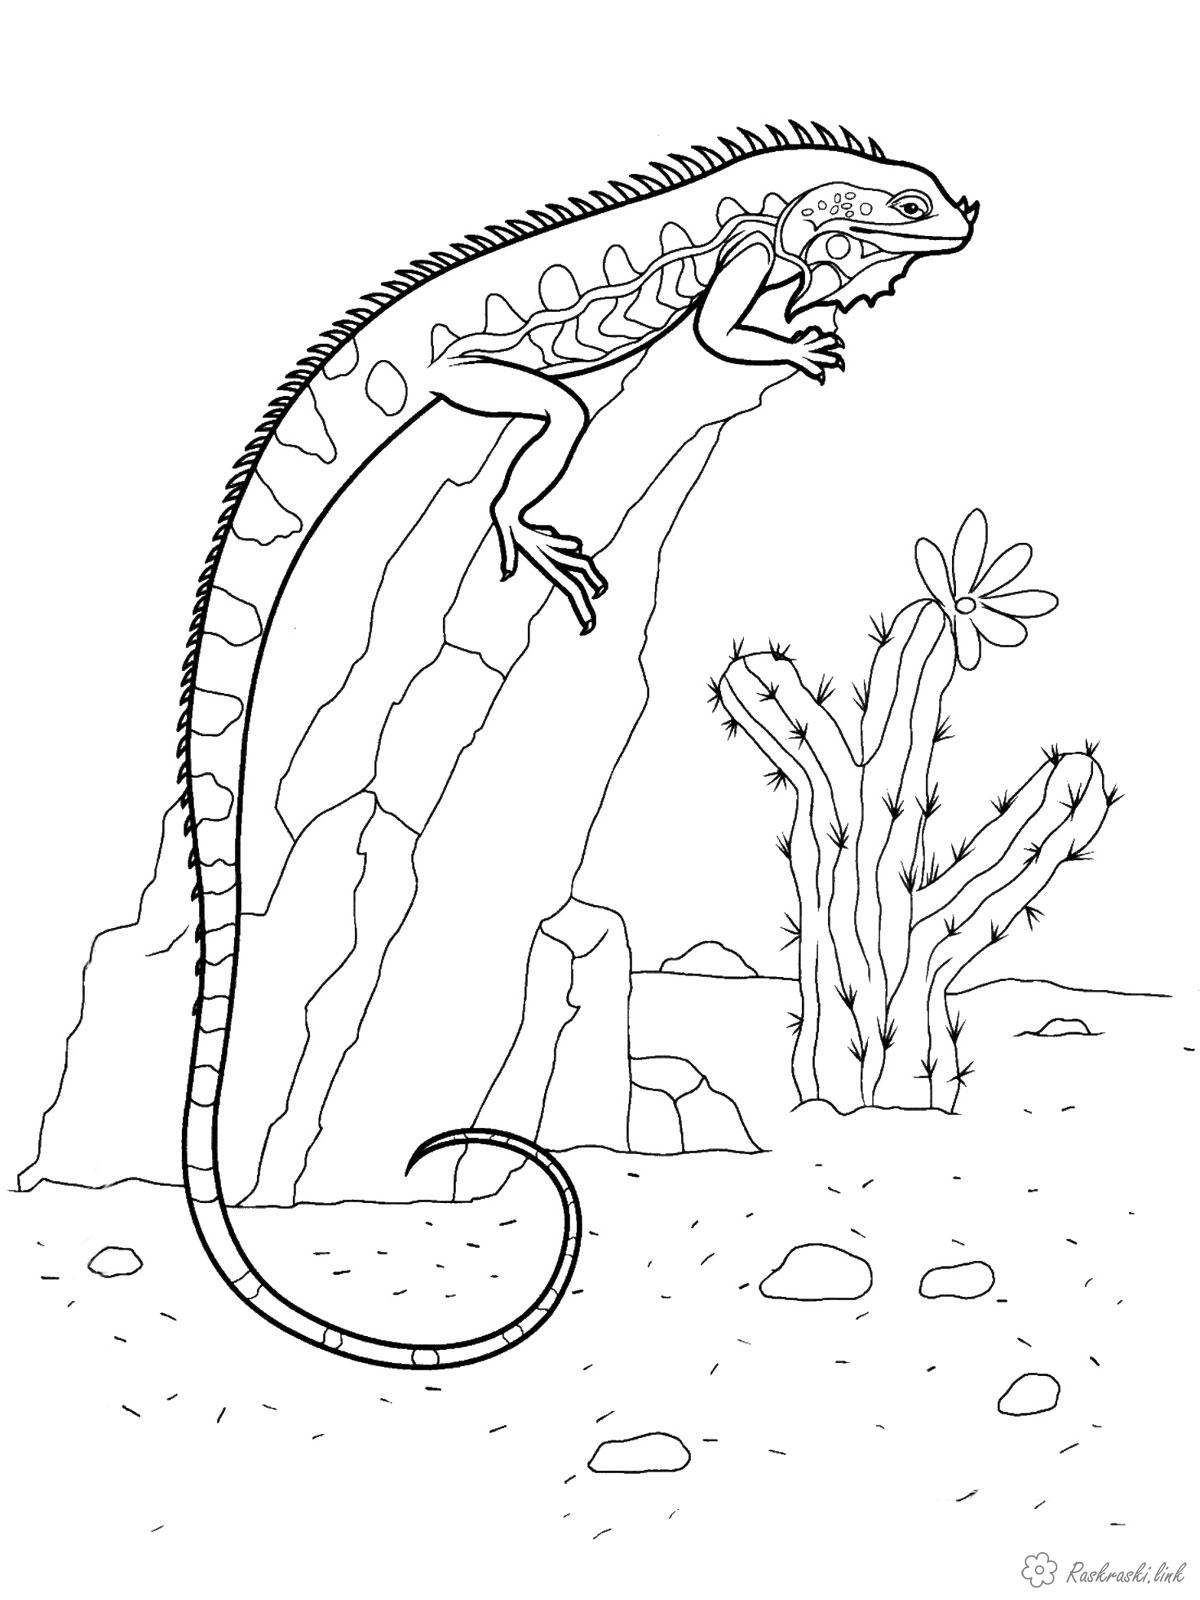 reptiles-free-coloring-pages-online-print